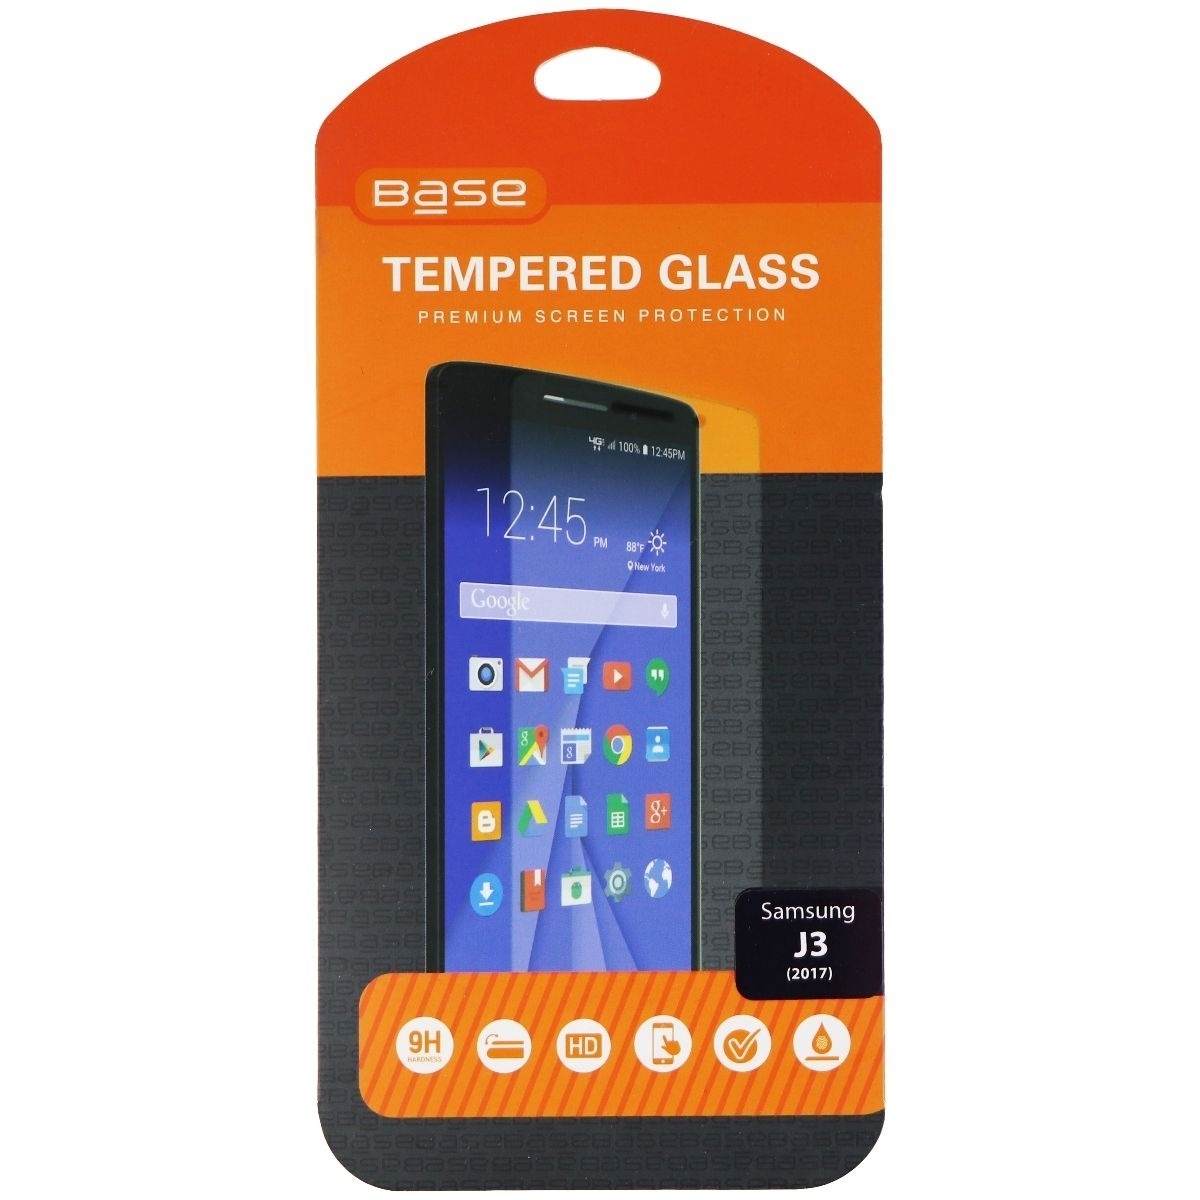 Base Tempered Glass Premium Screen Protector For Samsung Galaxy J3 2017 - Clear